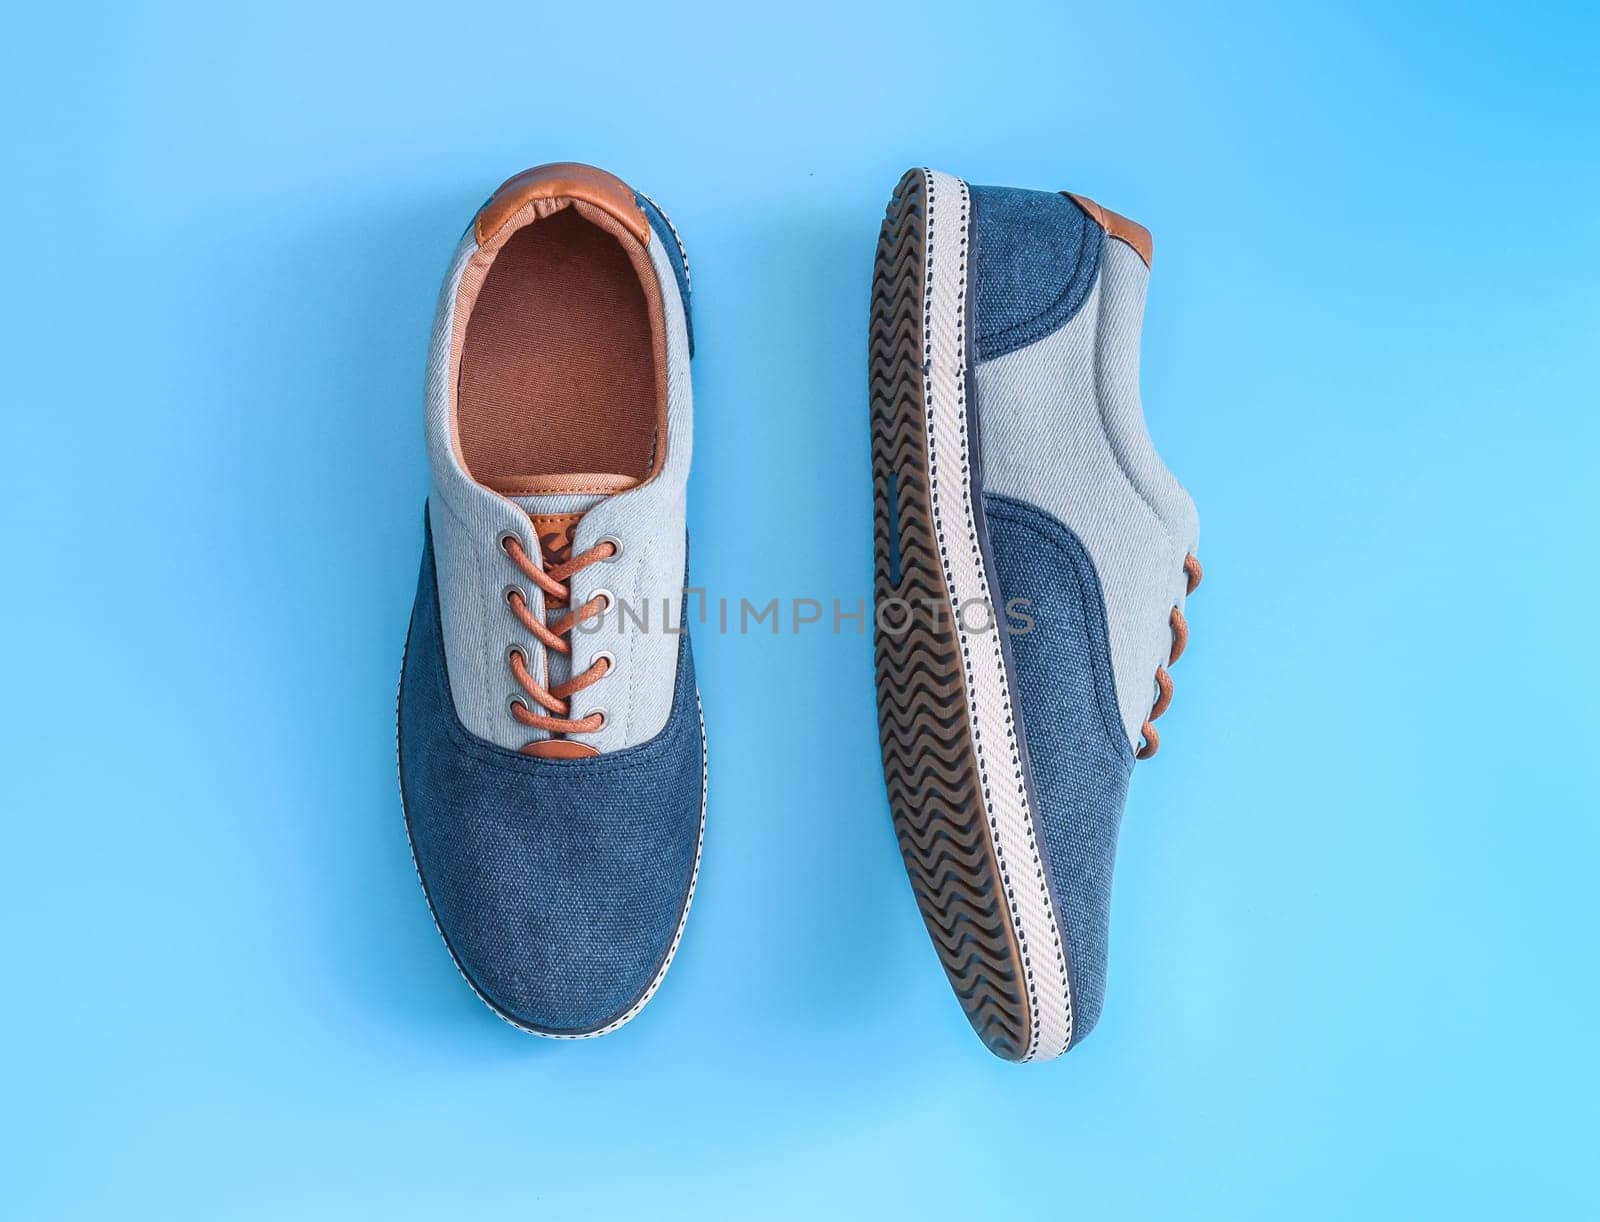 One pair of denim sneakers lies in the center on a blue background, flat lay close-up. The concept of fashion, beauty, man shoes.